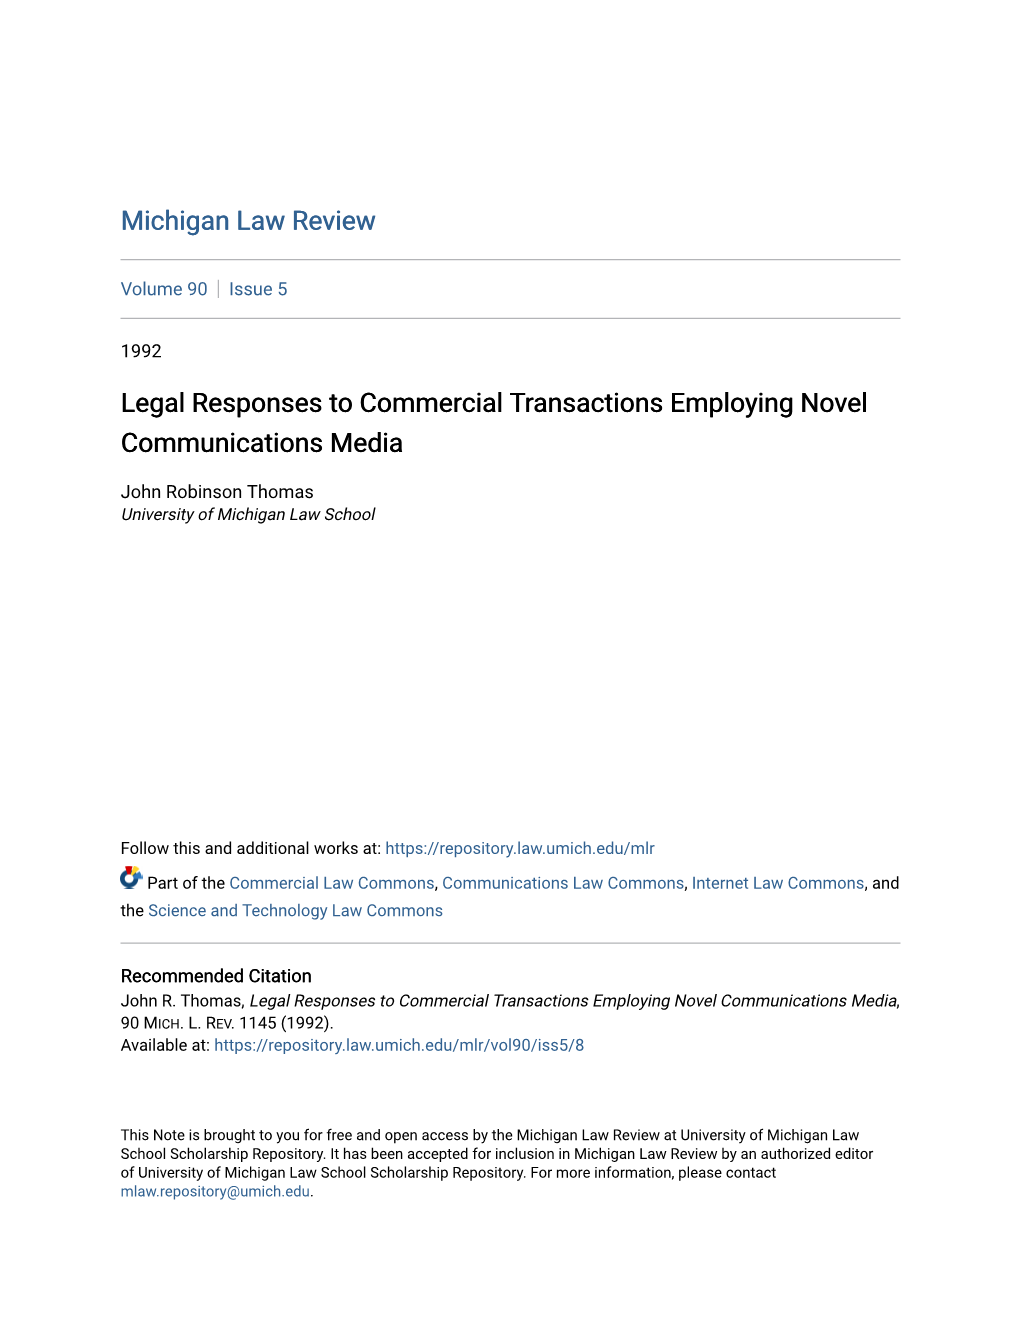 Legal Responses to Commercial Transactions Employing Novel Communications Media